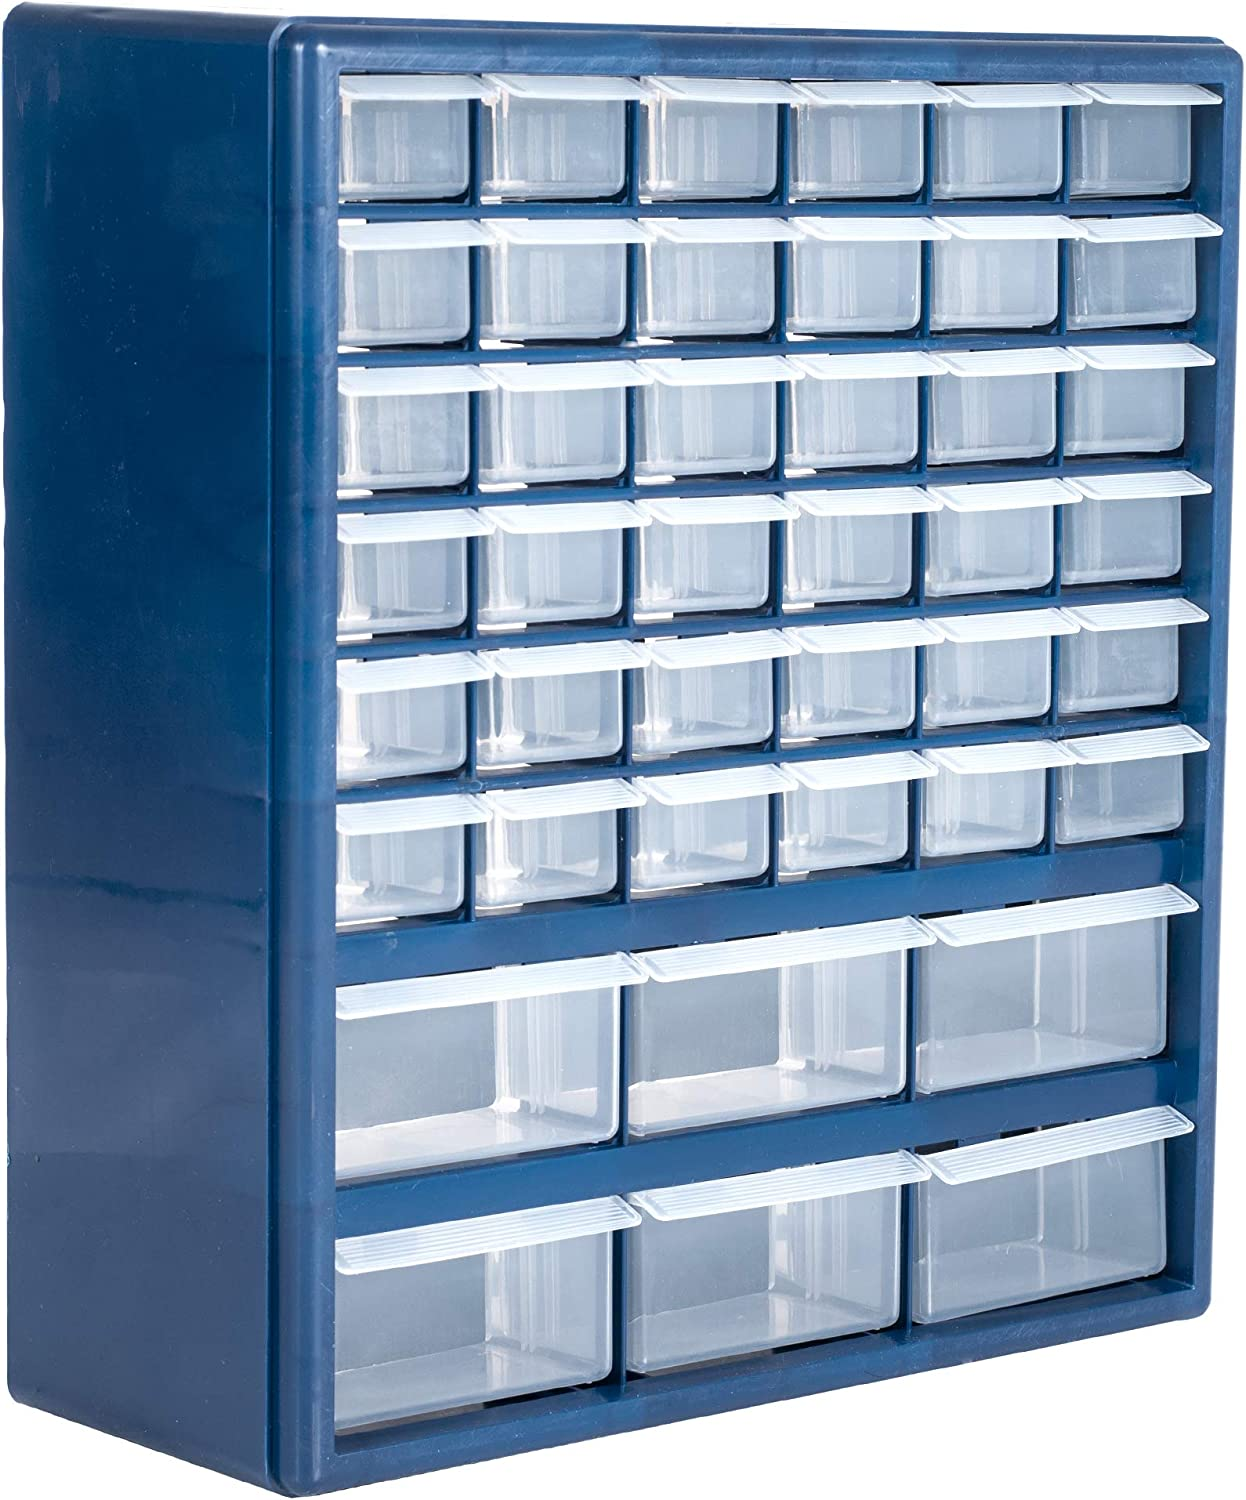 Plastic Storage Drawers – 42 Compartment Organizer – Desktop or Wall Mount $29.95